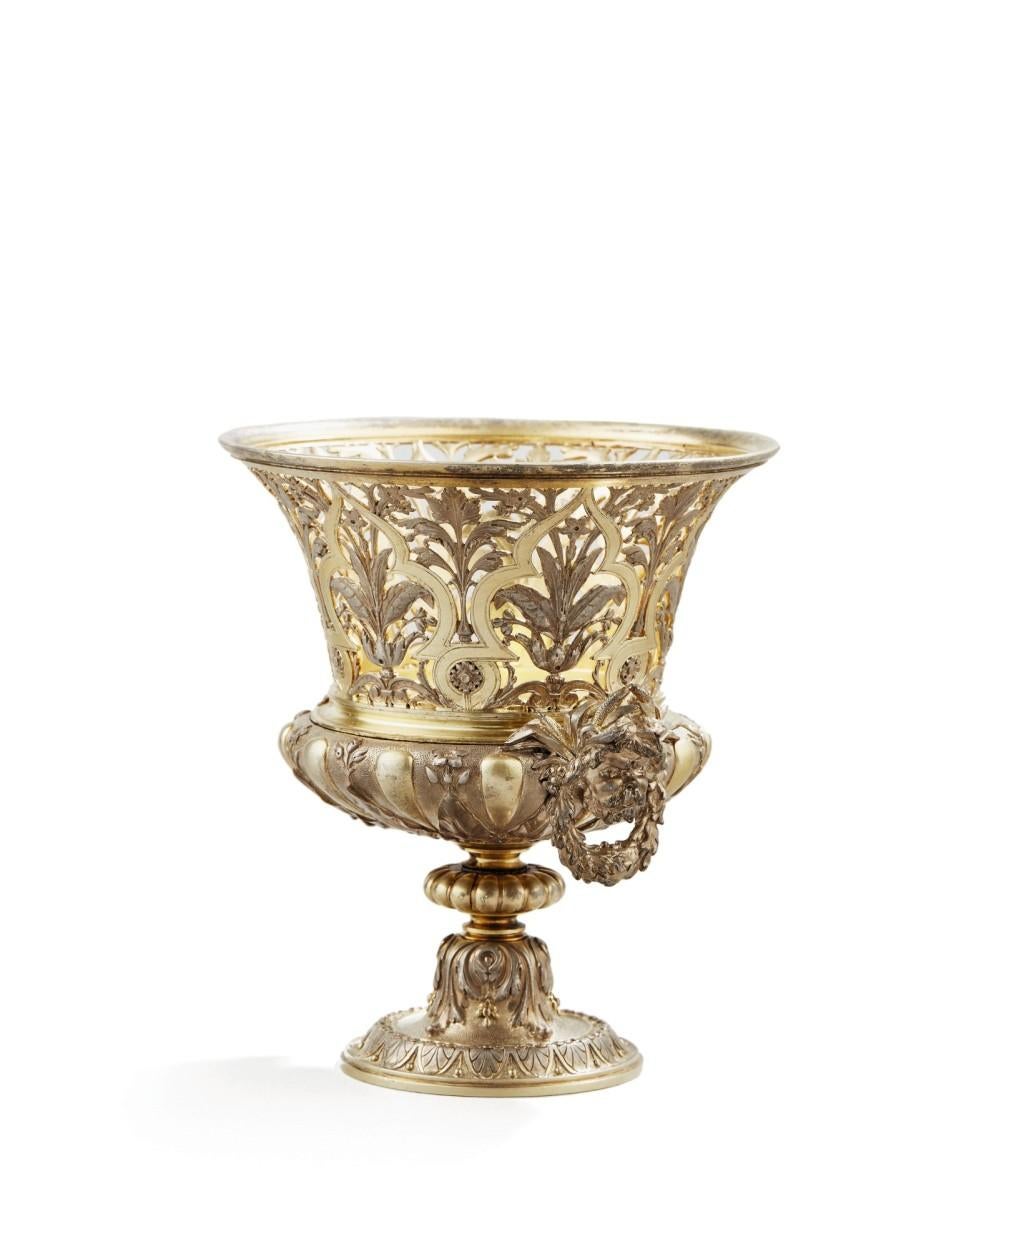 Fanniere Freres, a French two color gilt bronze vase, Paris, 1860

Exceptional quality orientalist style pierced bronze vase, molded with palms throughout the border. The body decorated with flowers and foliage scroll, with two river-God